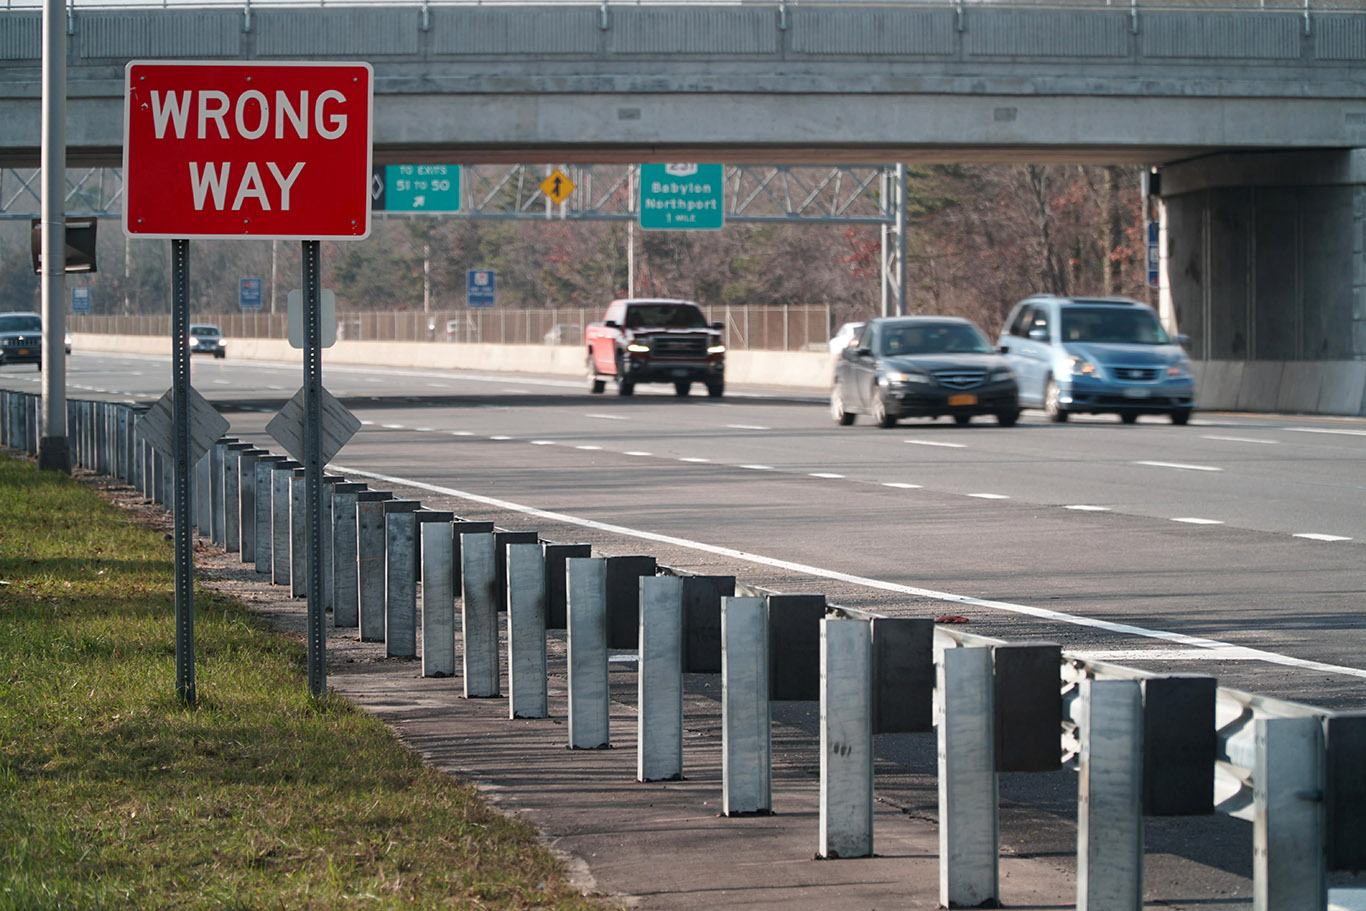 wrong-way driving accidents